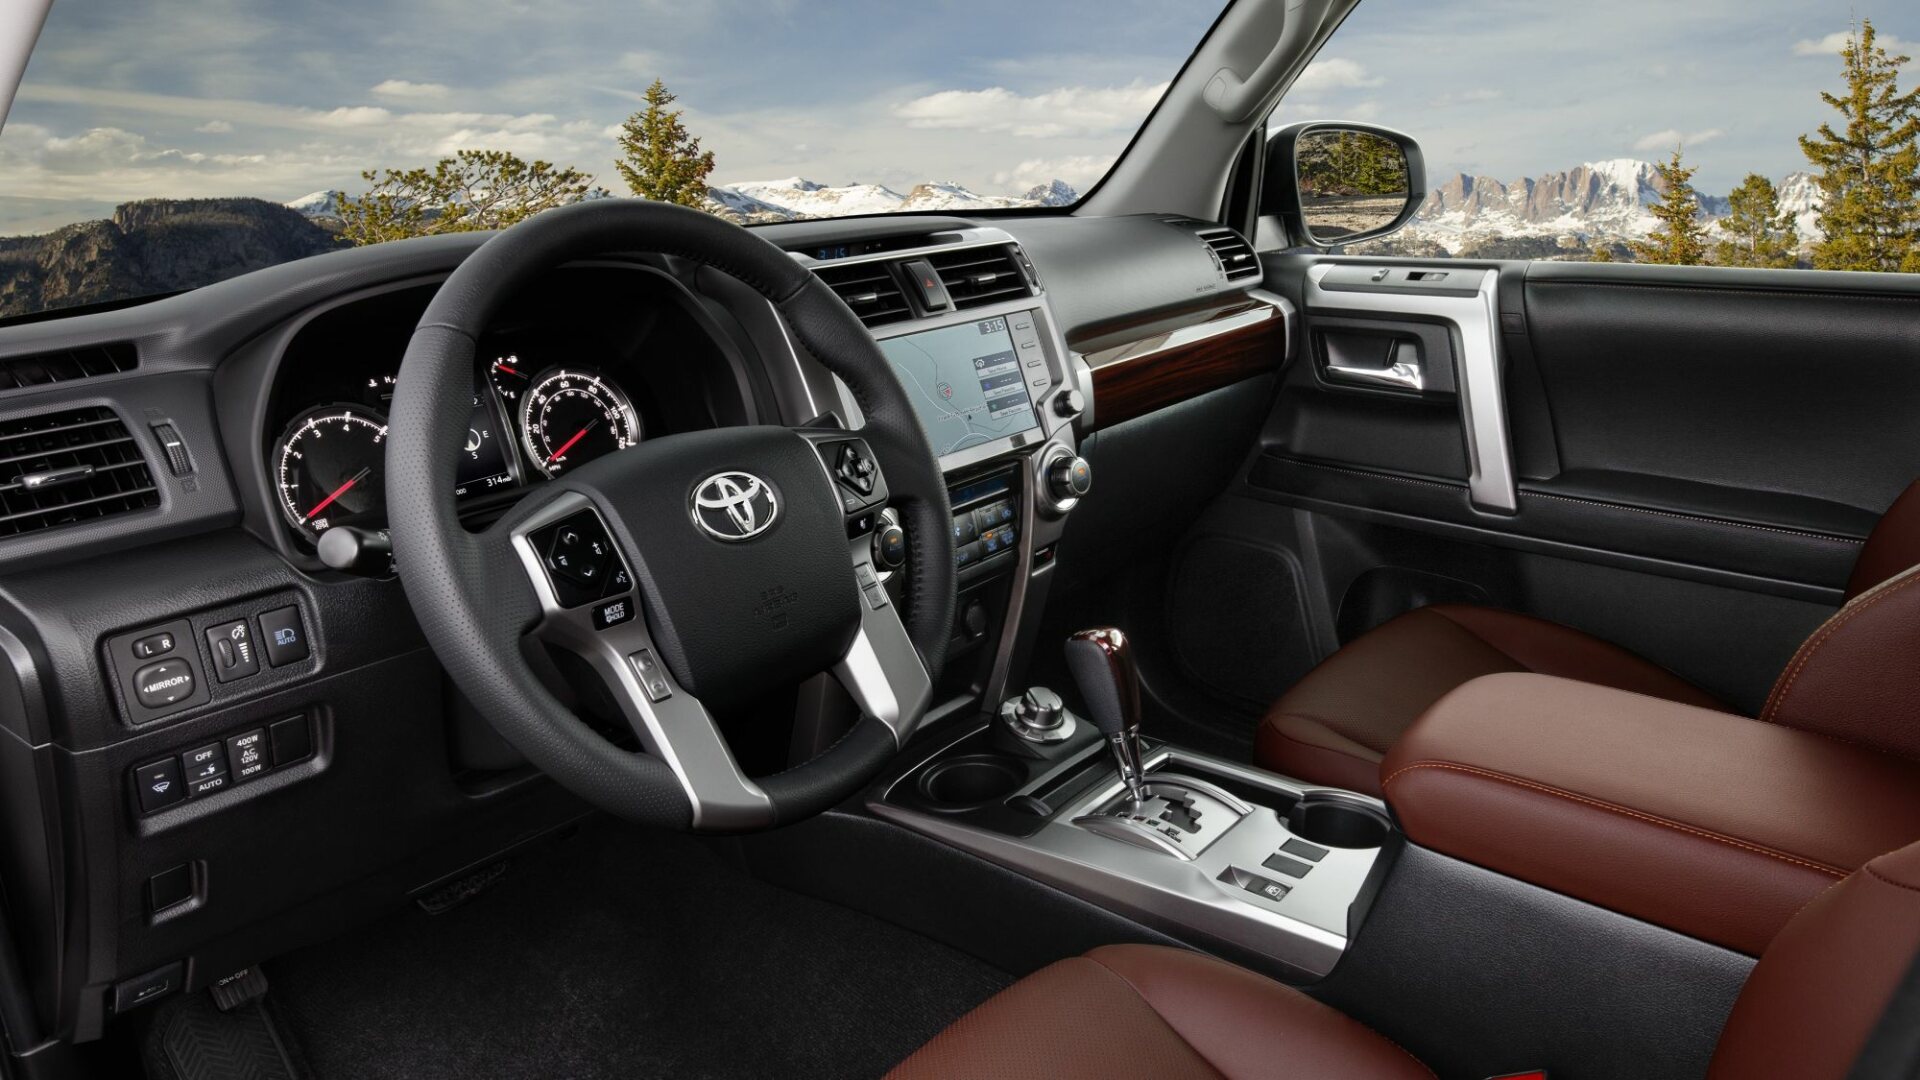 The Interior, Steering, Dashboard, And Central Console Of A Toyota 4Runner